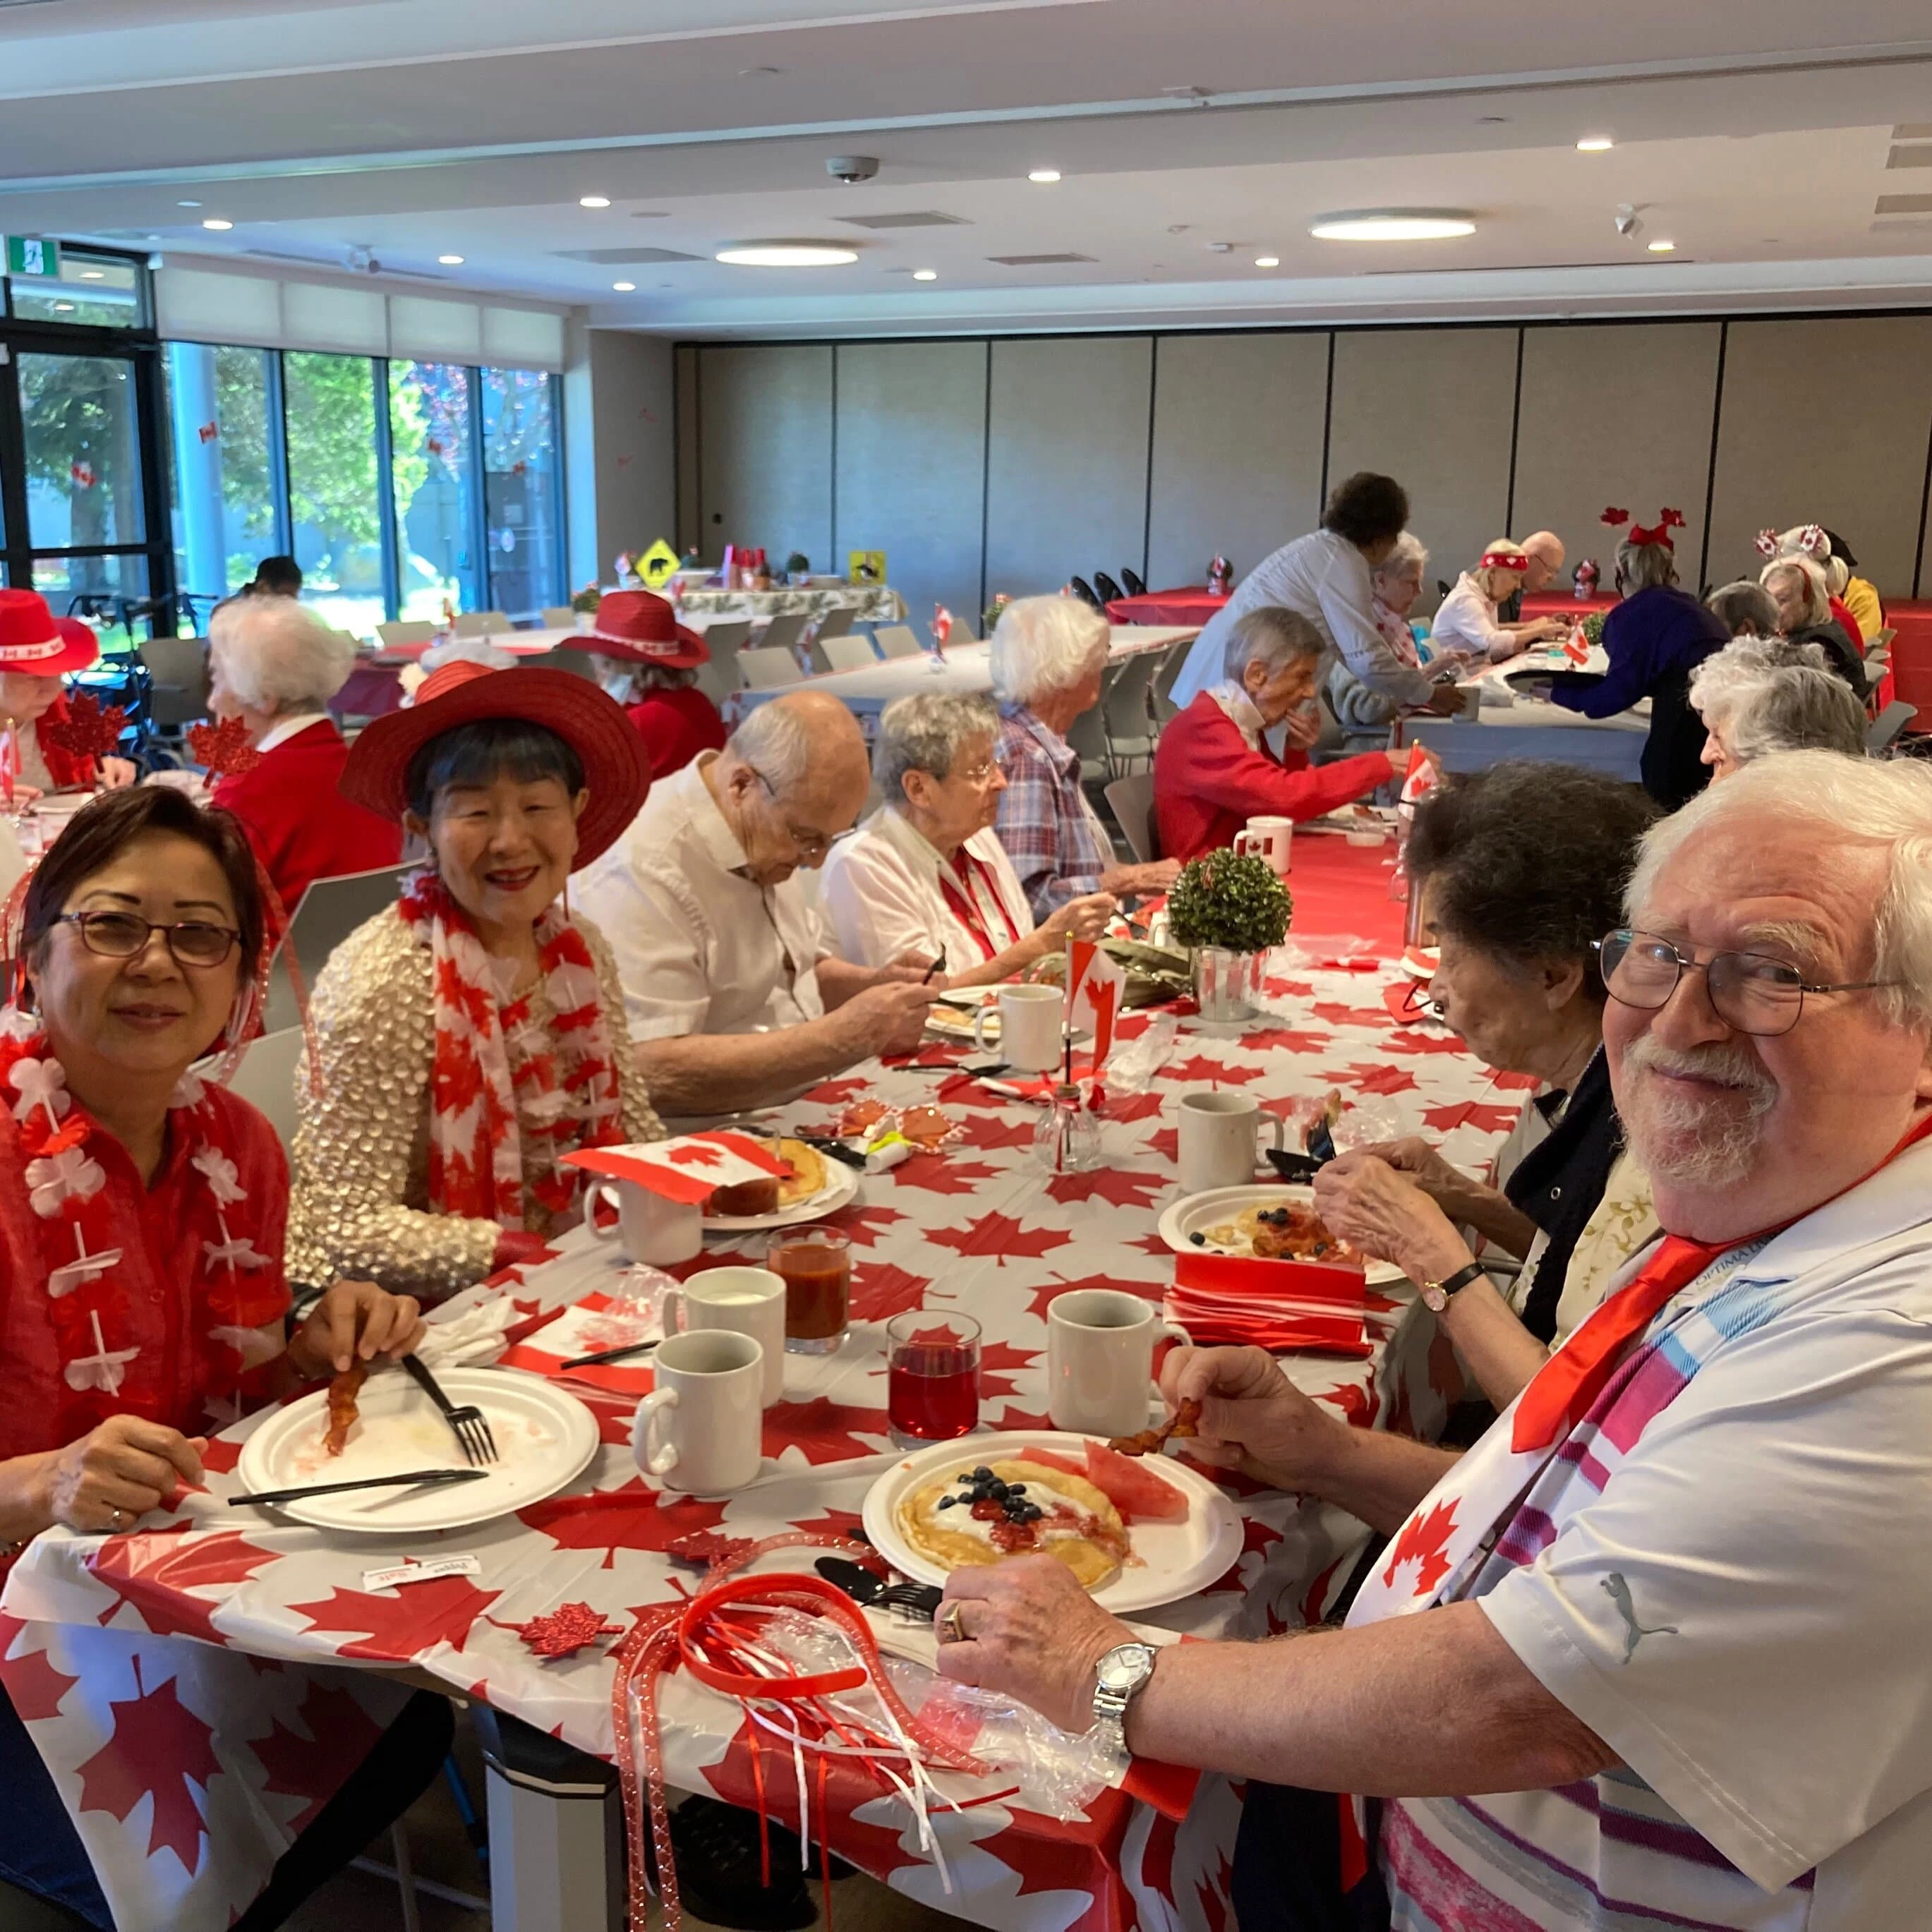 Some senior citizens having lunch on Canada Day